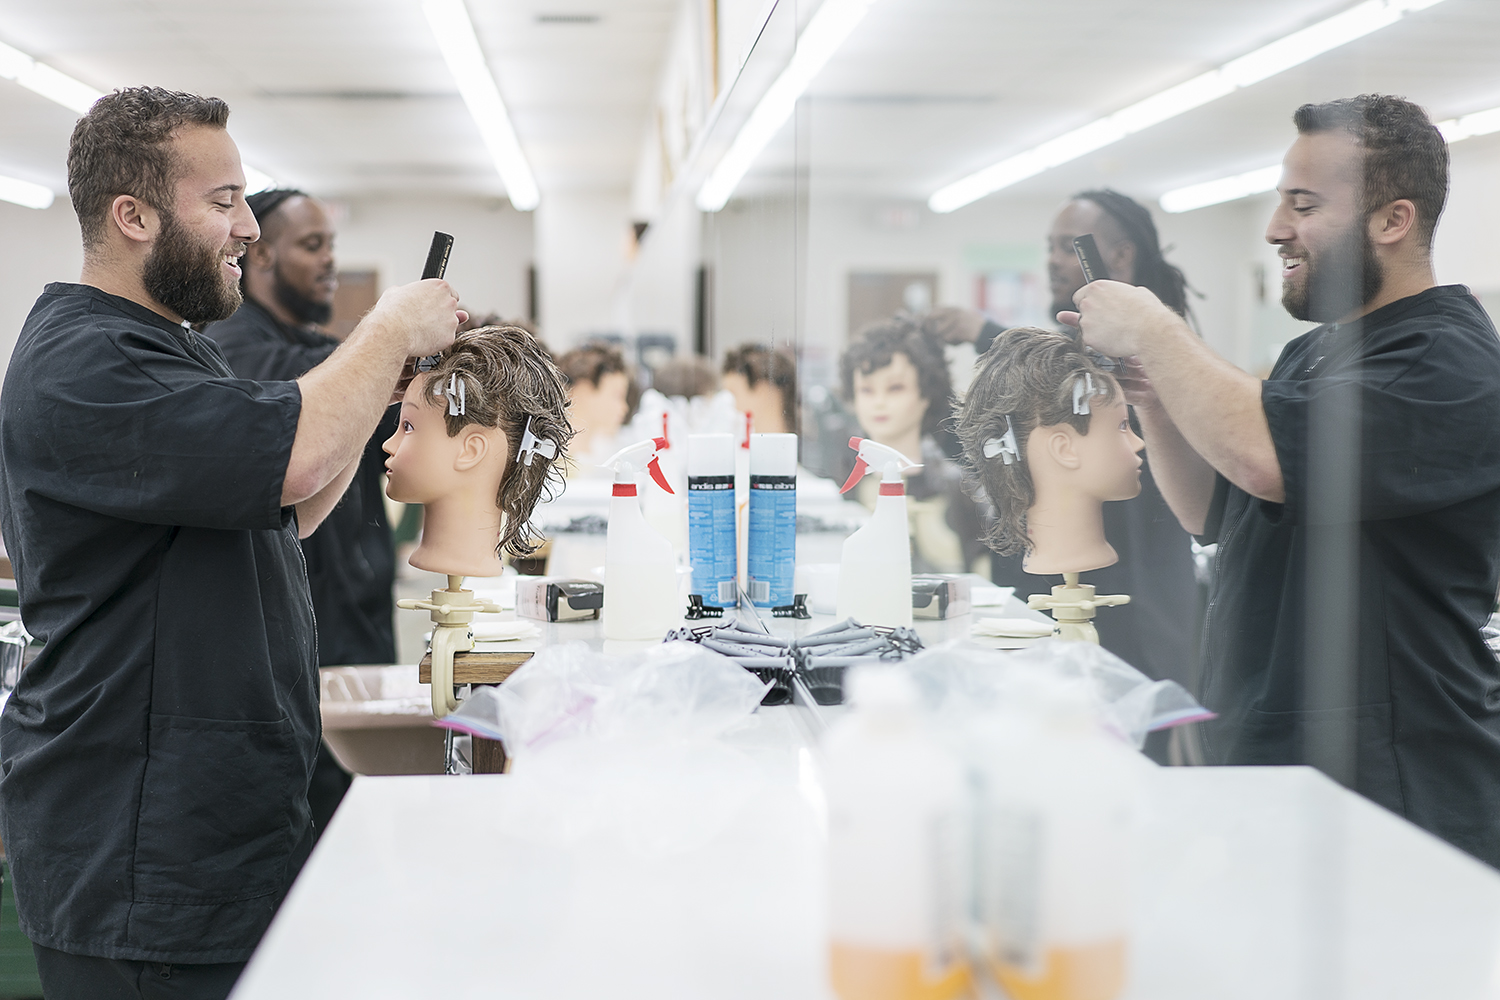 Flint, MI - Tuesday, February 6, 2018: Junior barbers Cole Stomp, 19, from Davison, and Tony Atlas, 32, from Flint practice on mannequins at the Flint Institute of Barbering.